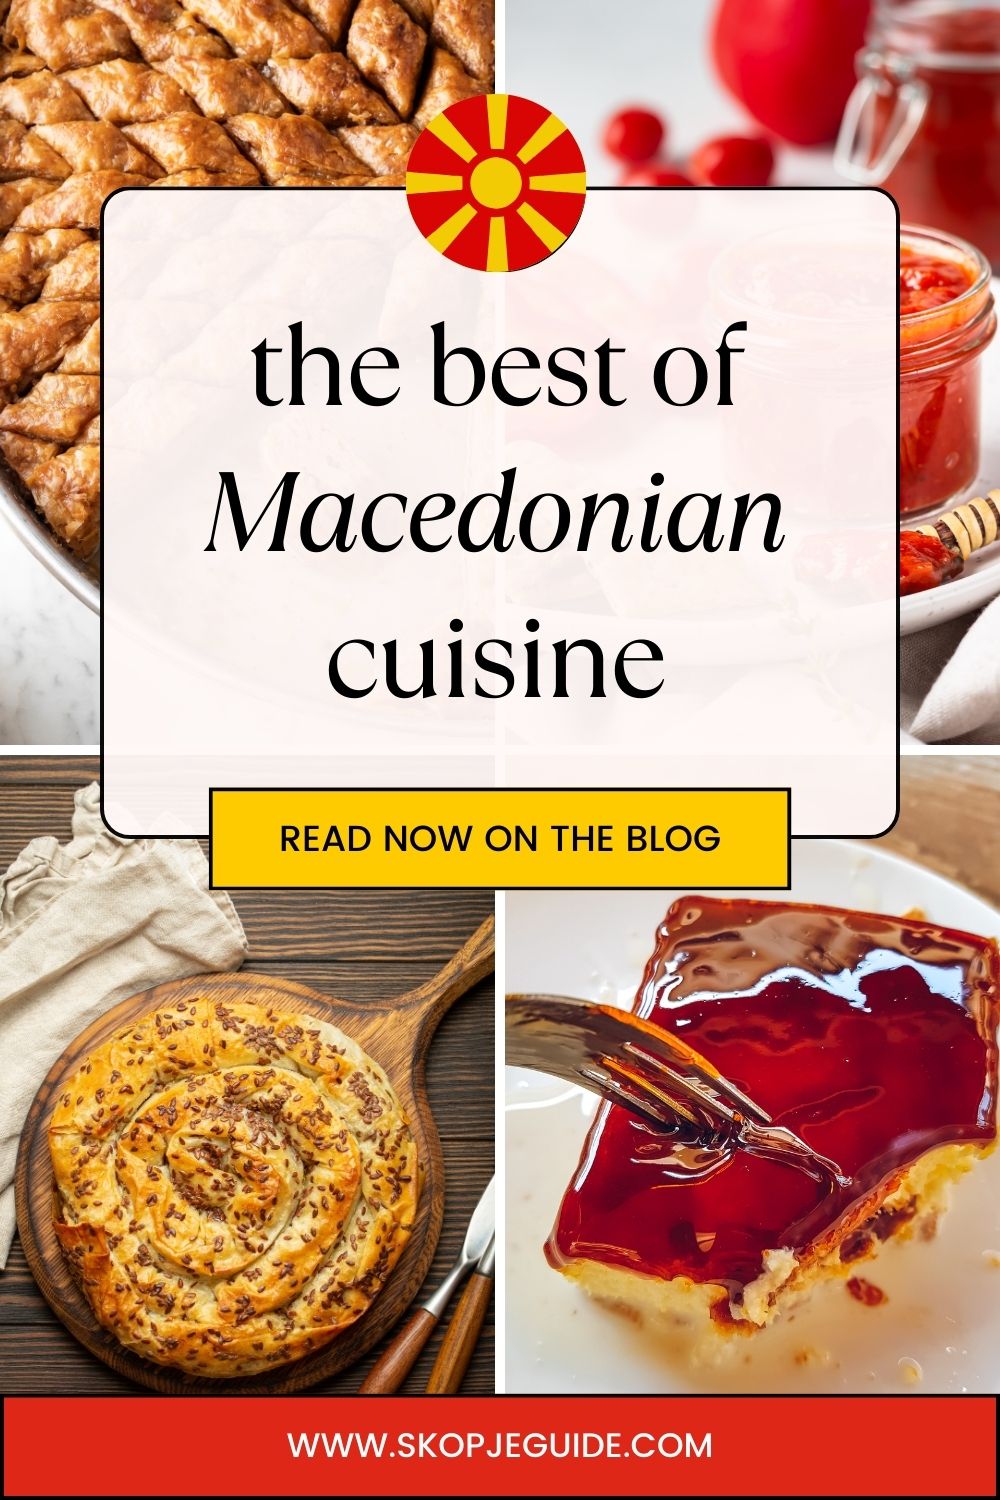 the best of macedonian cuisine